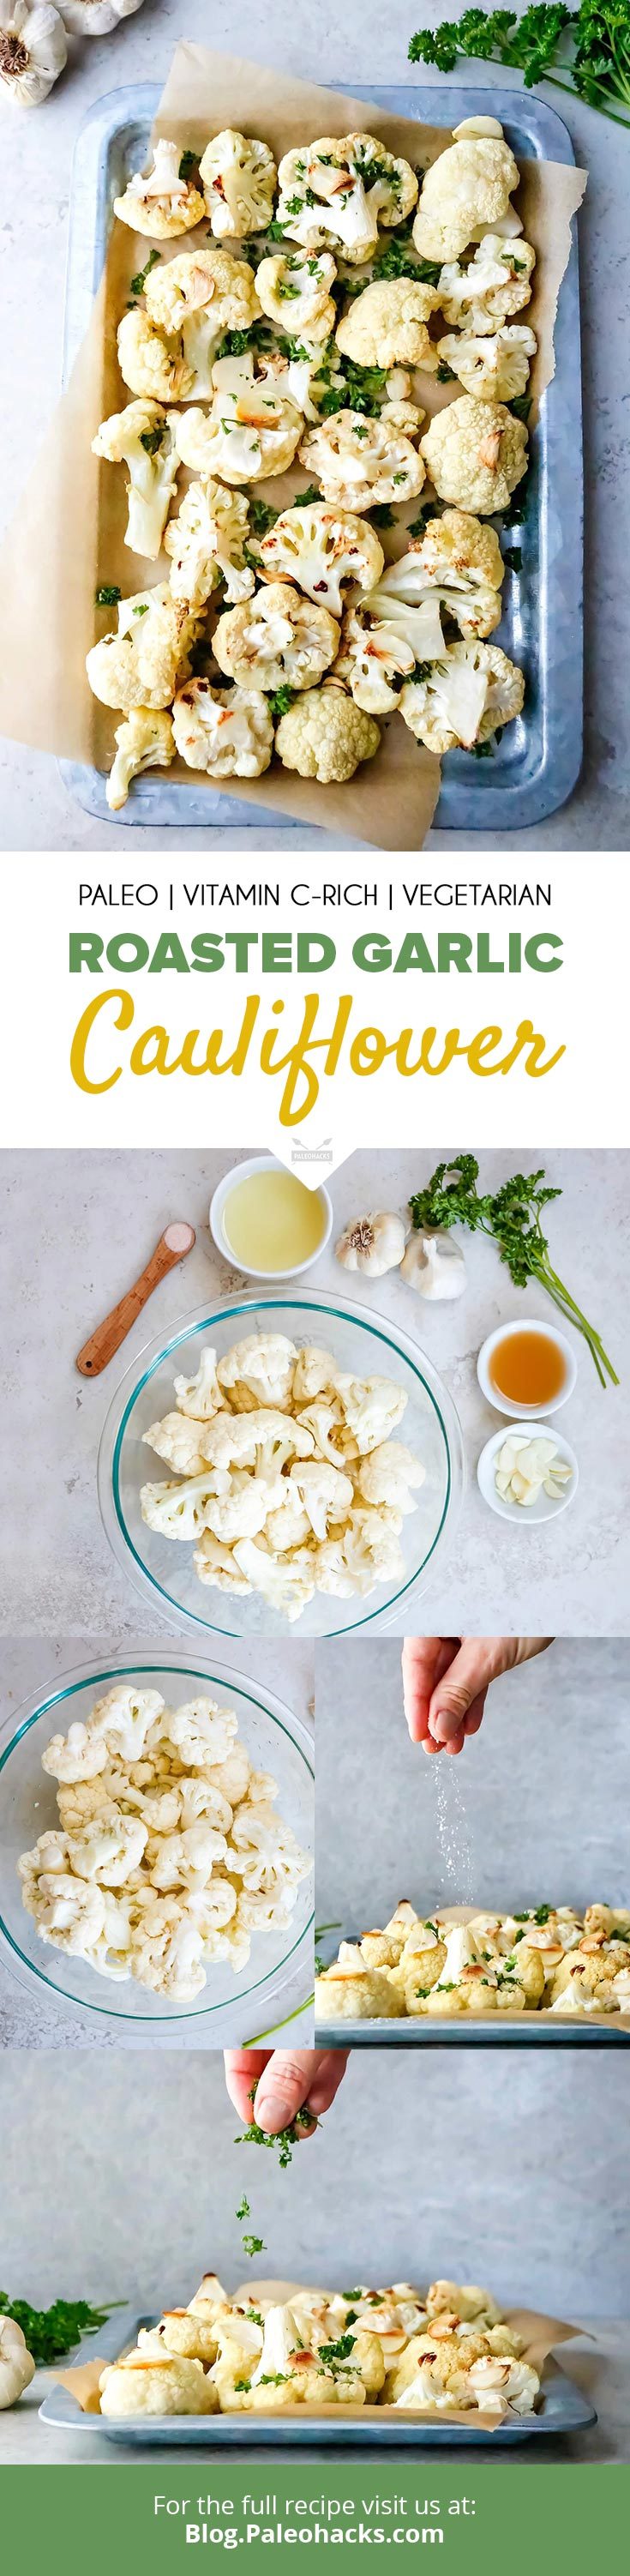 Boost your gut health with this Roasted Garlic Cauliflower, complete with cancer-fighting nutrients. Cauliflower never looked so good.